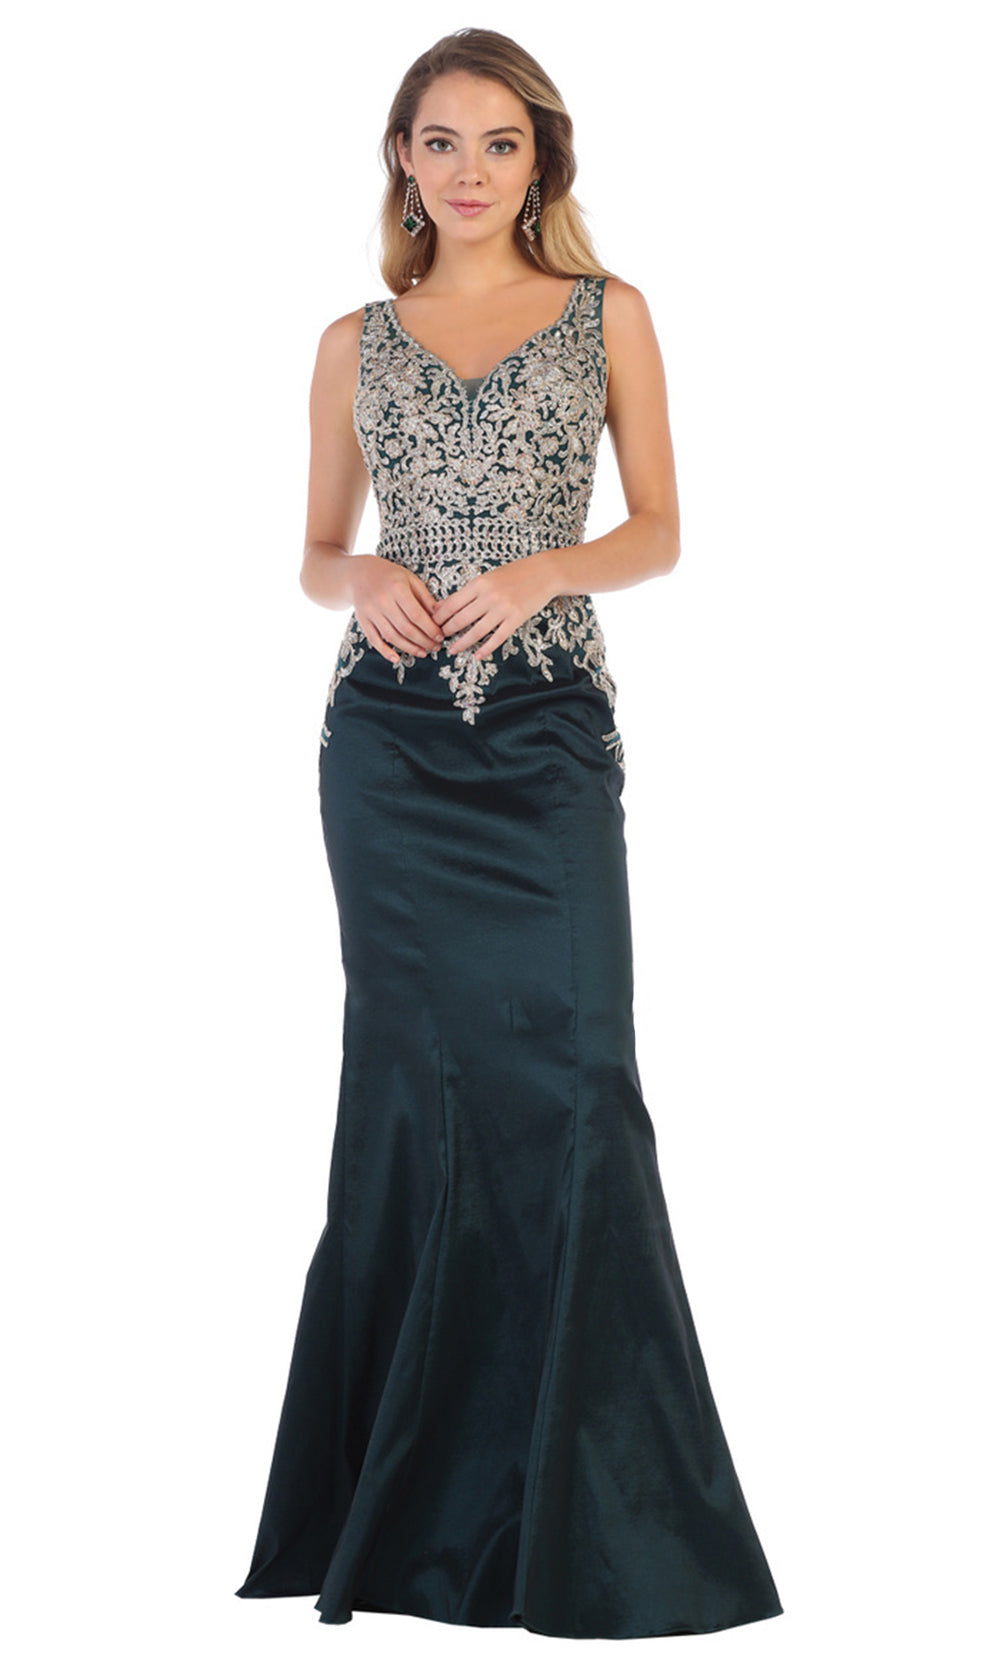 May Queen - MQ1608 Embellished V Neck Trumpet Dress In Green